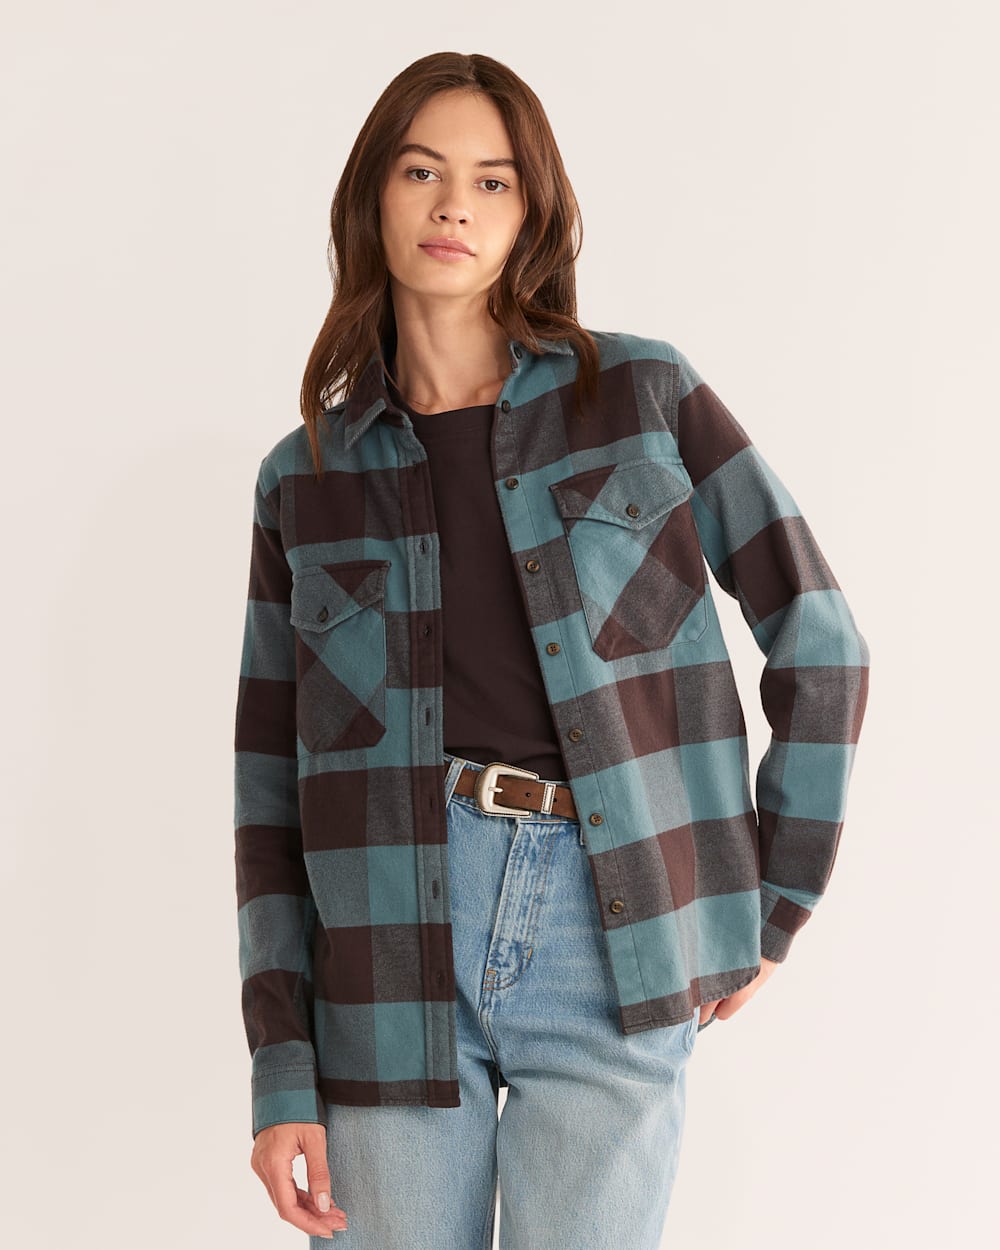 WOMEN'S MADISON DOUBLE-BRUSHED FLANNEL SHIRT IN SHALE/COFFEE BUFFALO CHECK image number 1